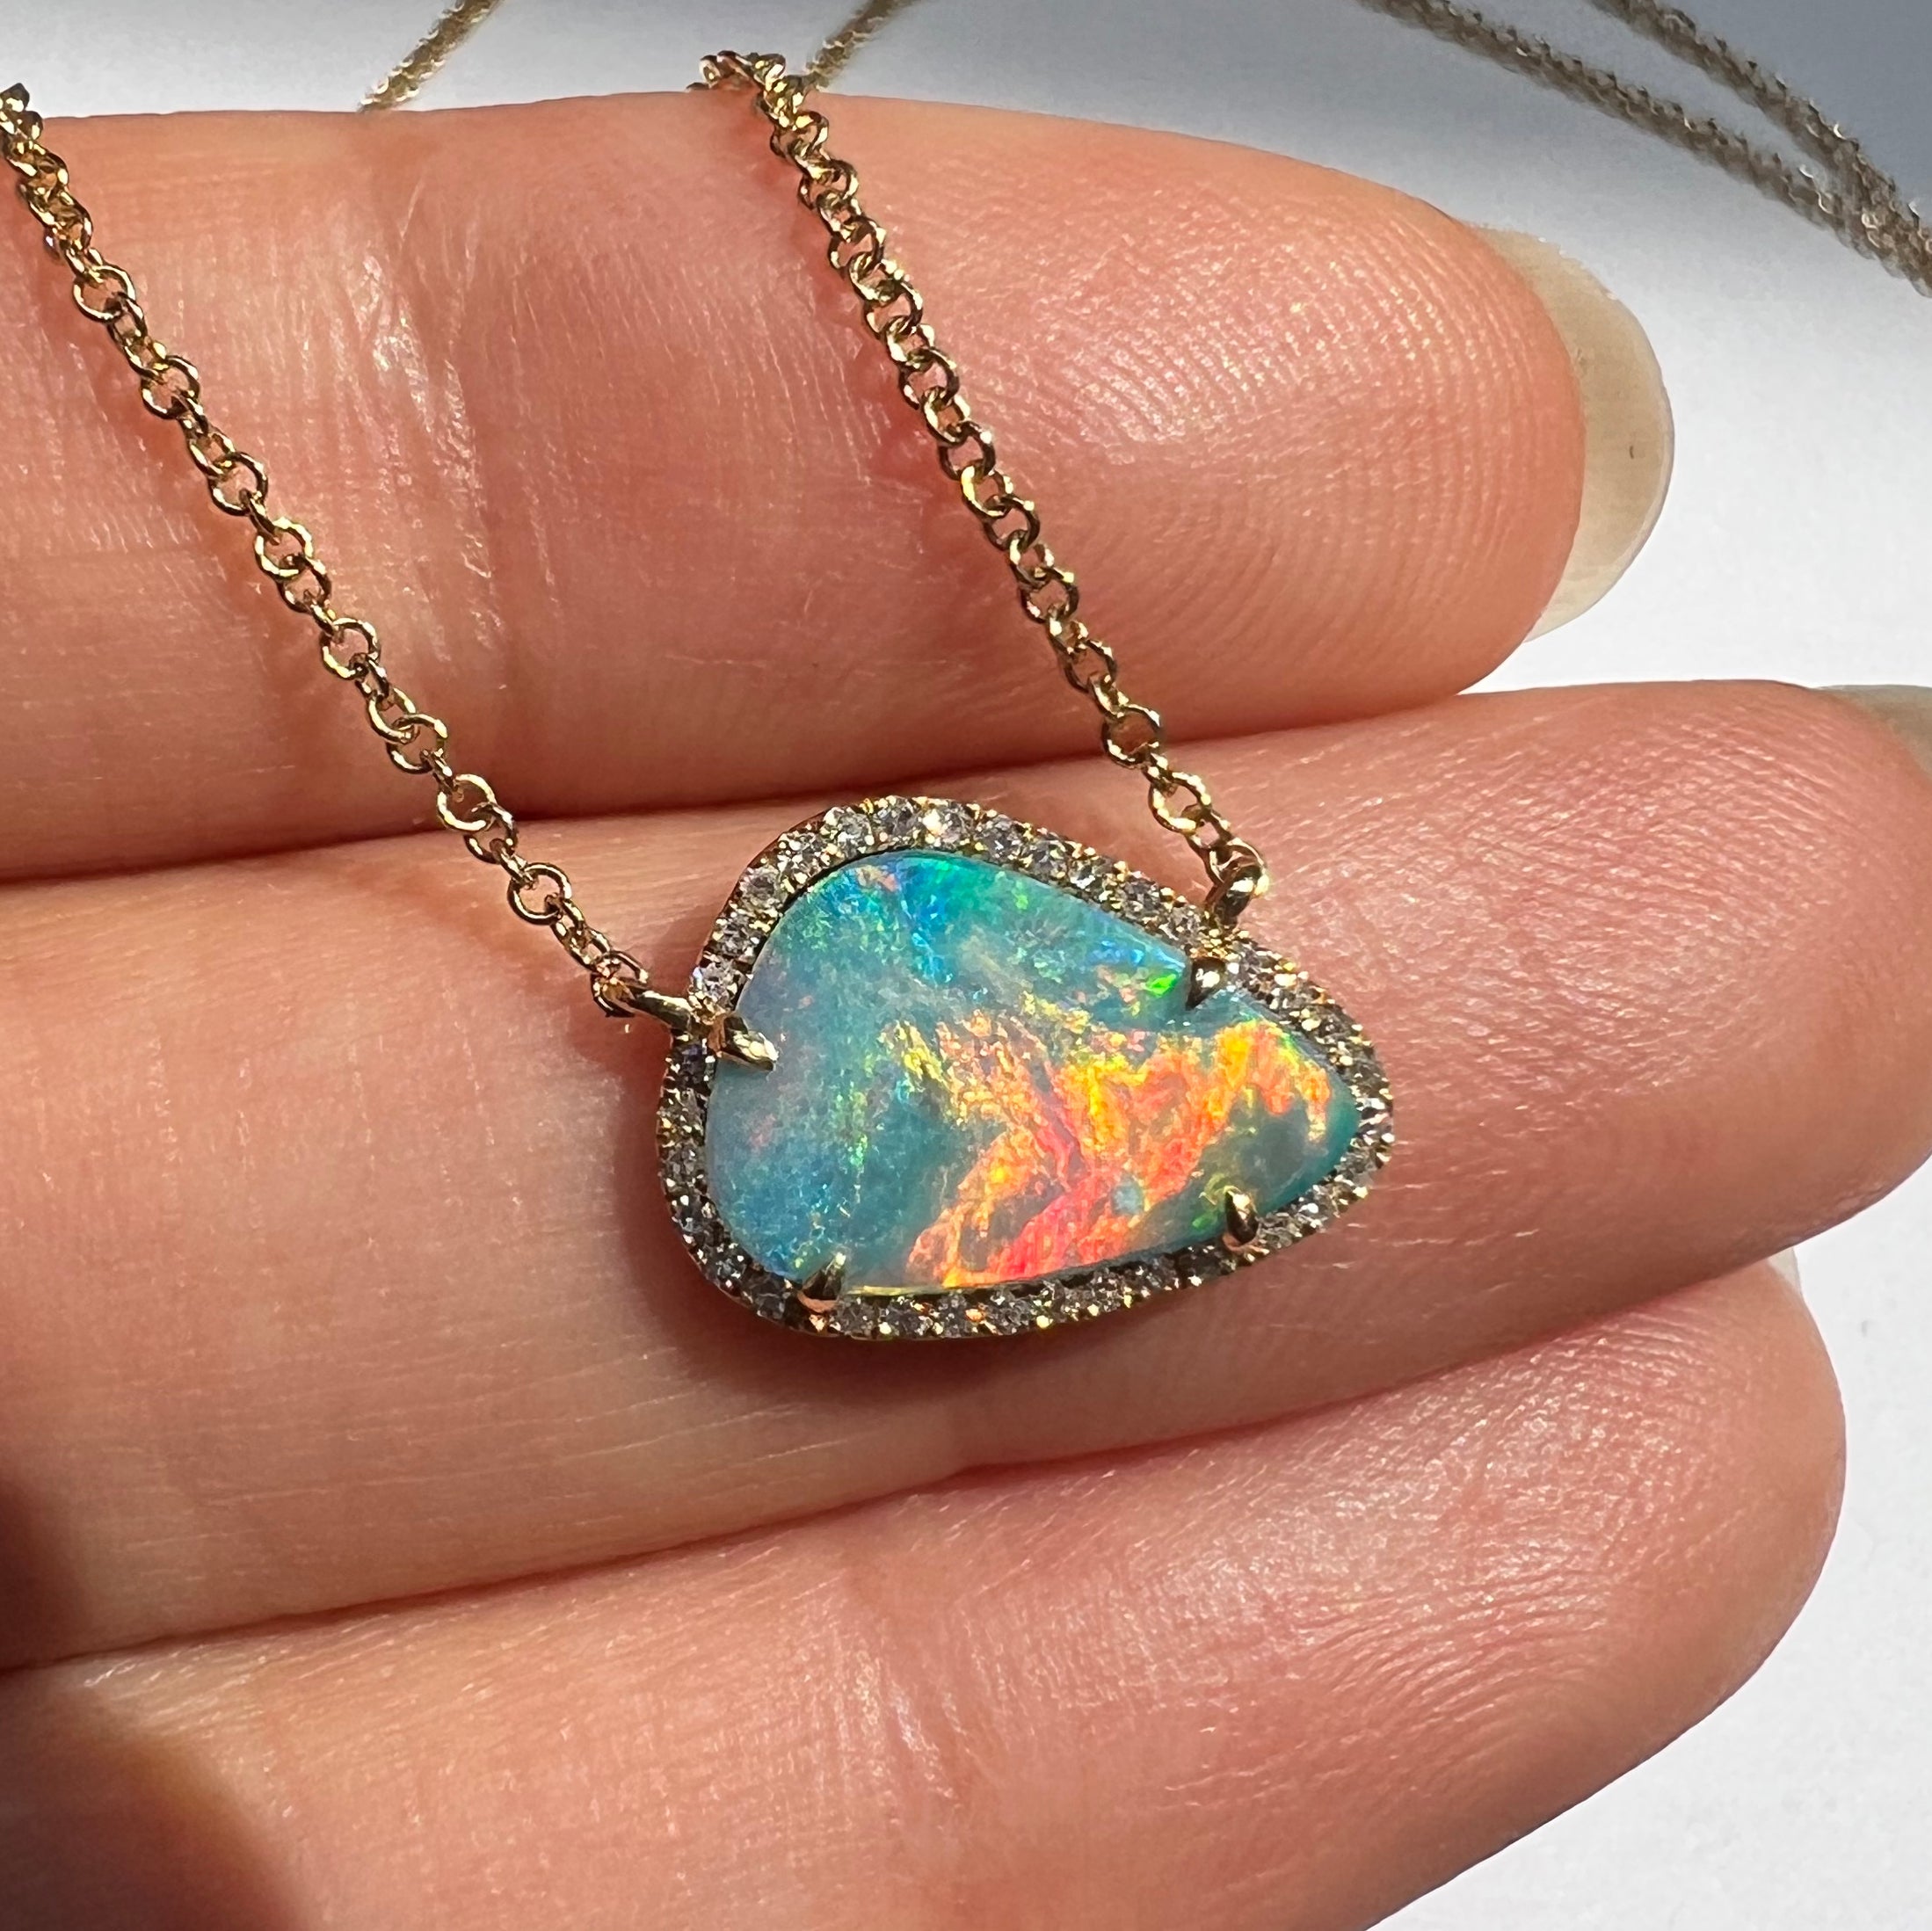 Buy Our Latest Collection of Fire Opal Pendant Necklaces With Diamond